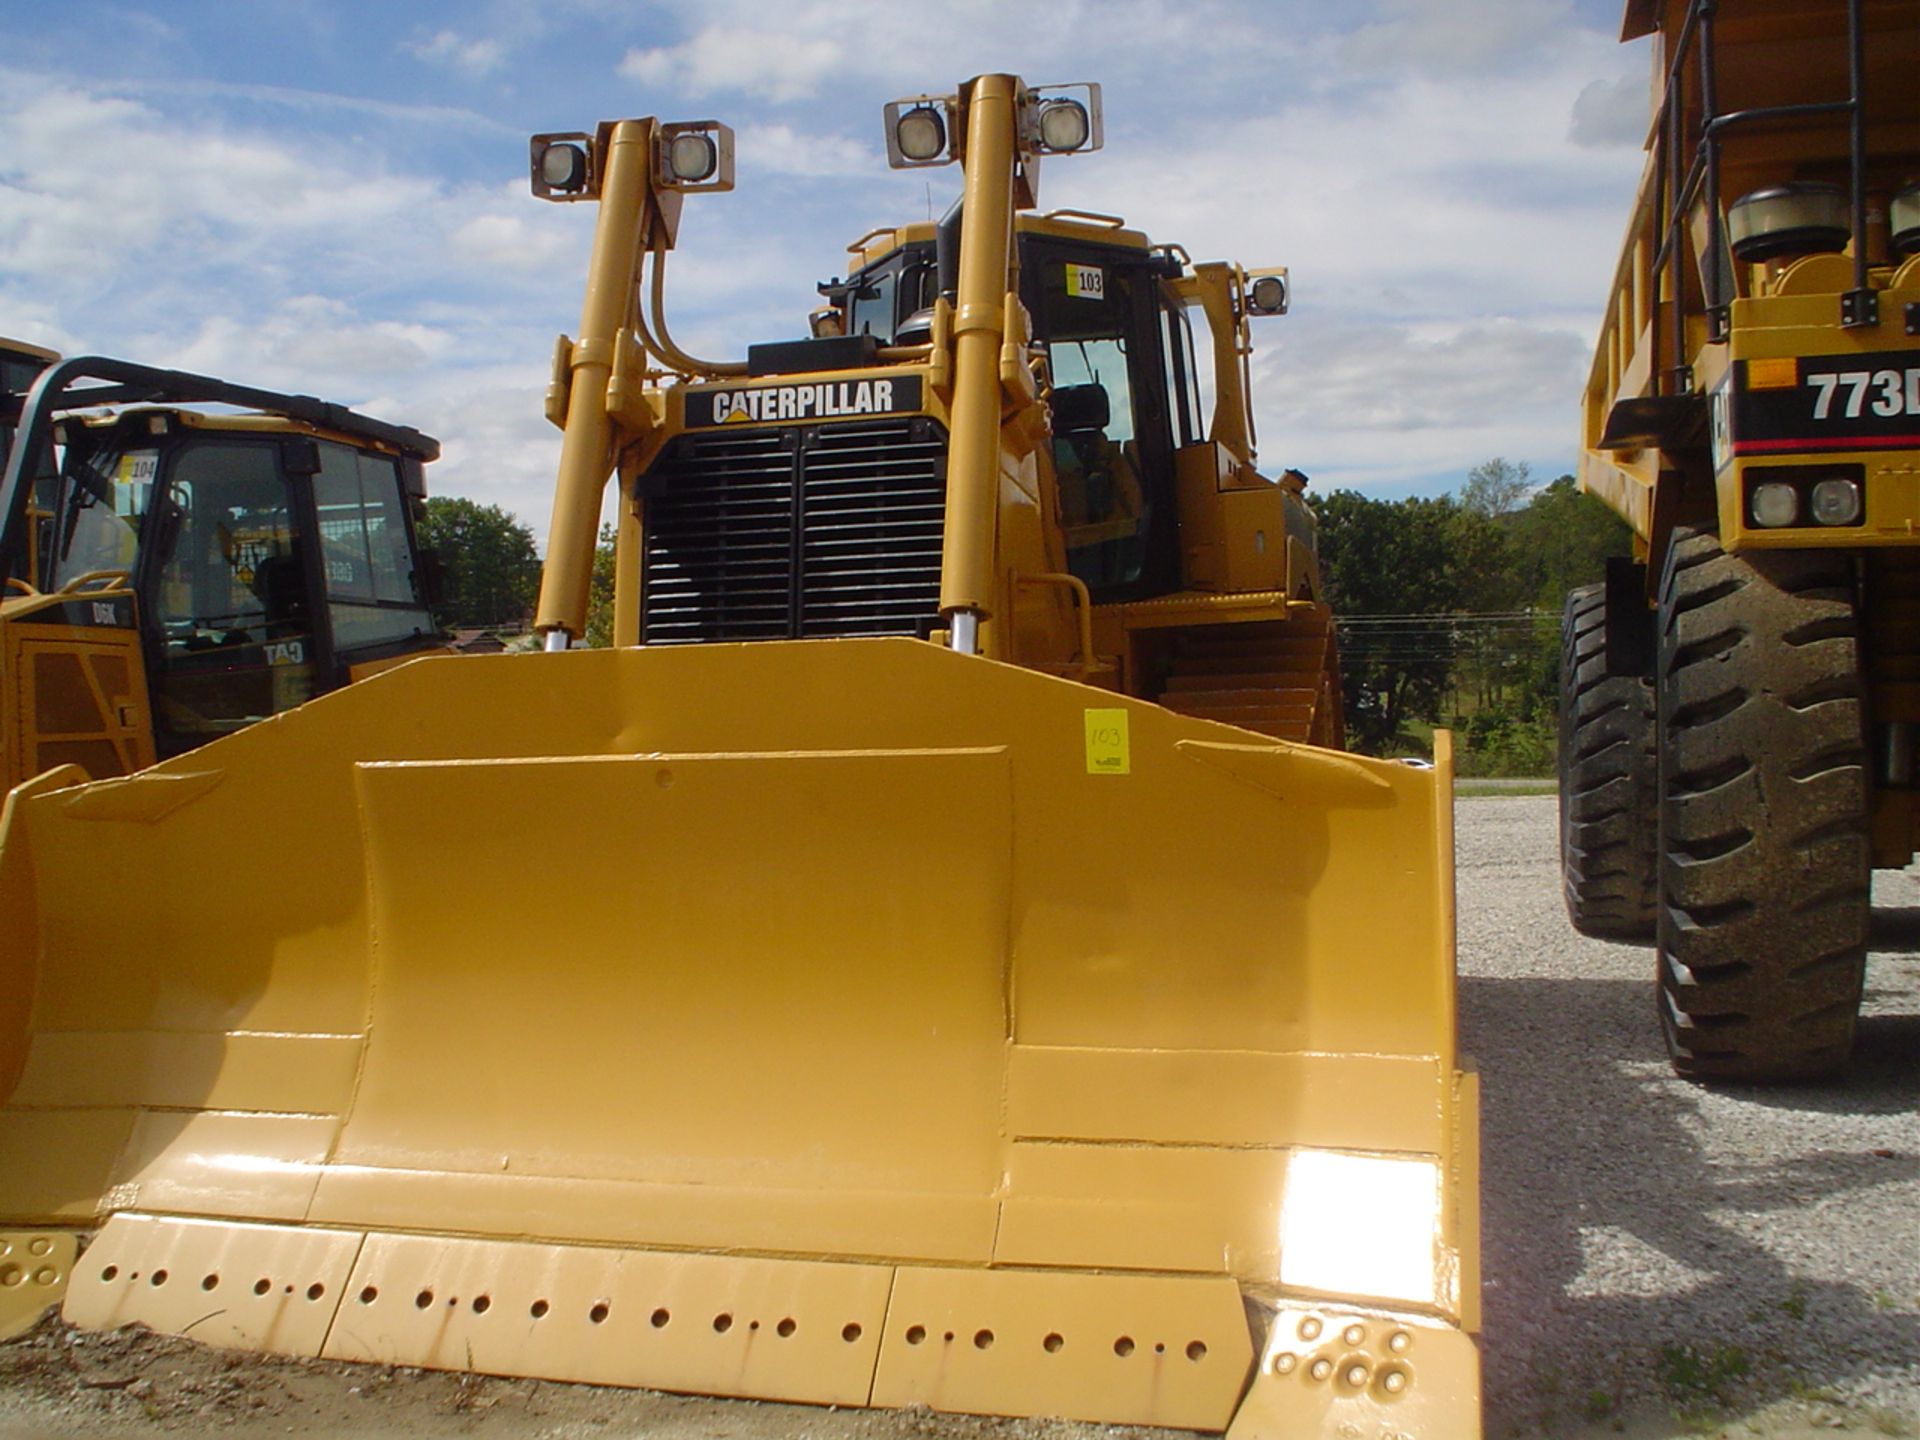 2009 CATERPILLAR D8T CRAWLER TRACTOR, ENCLOSED CAB, 24'' WIDE PADS, 12-1/2' U-SHAPED BLADE, NEW